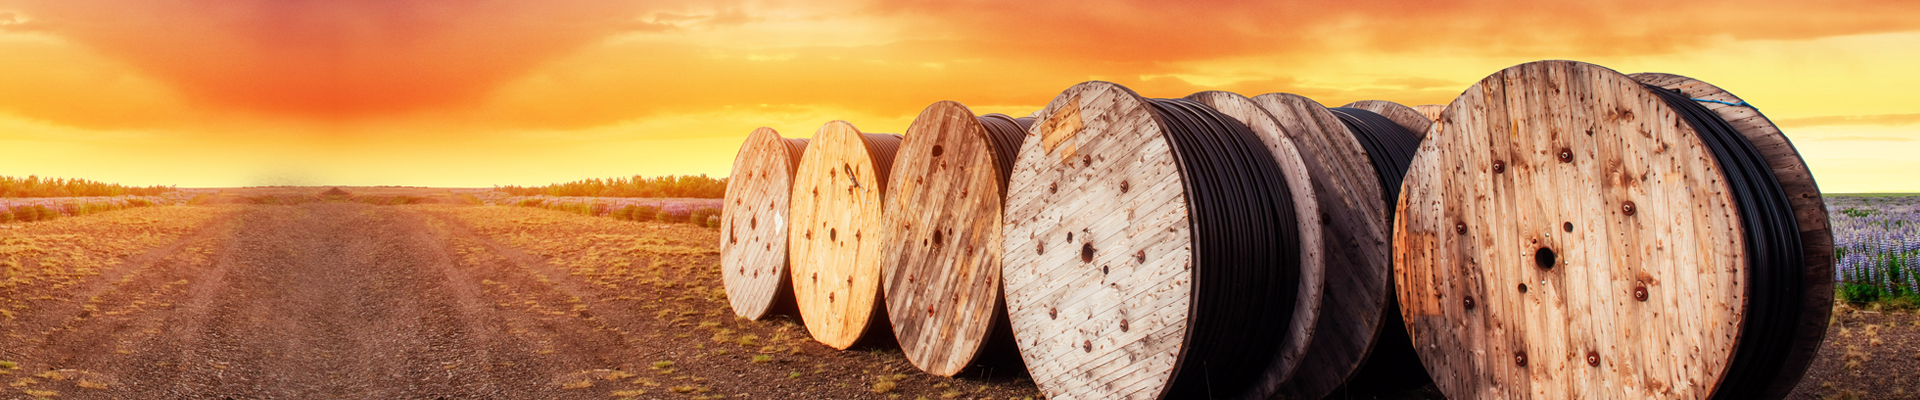 Cable reels on a field with the sunset in the background